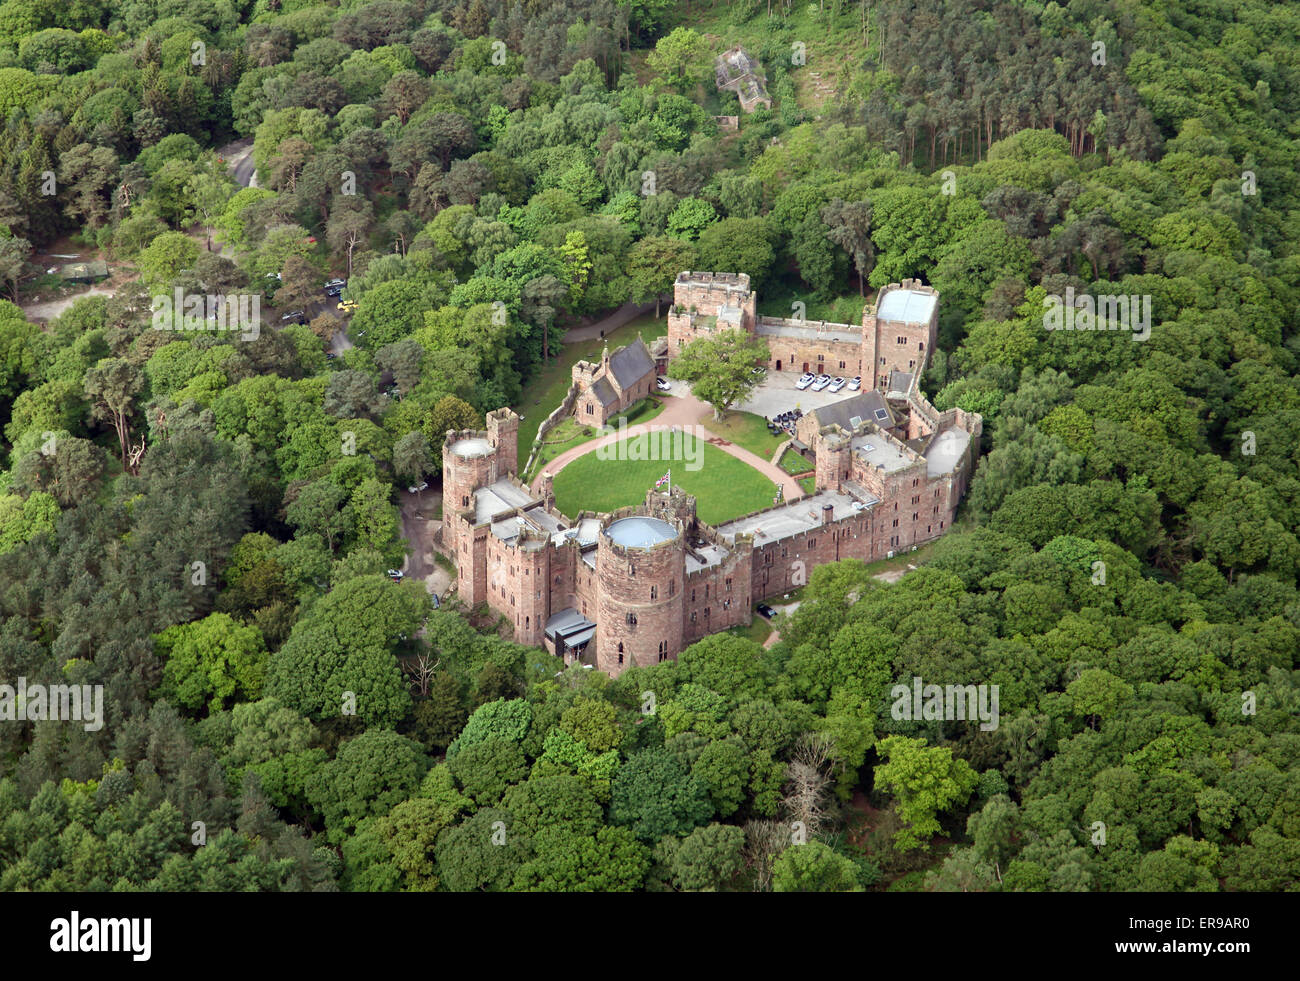 aerial view of Peckforton Castle in Cheshire, UK Stock Photo